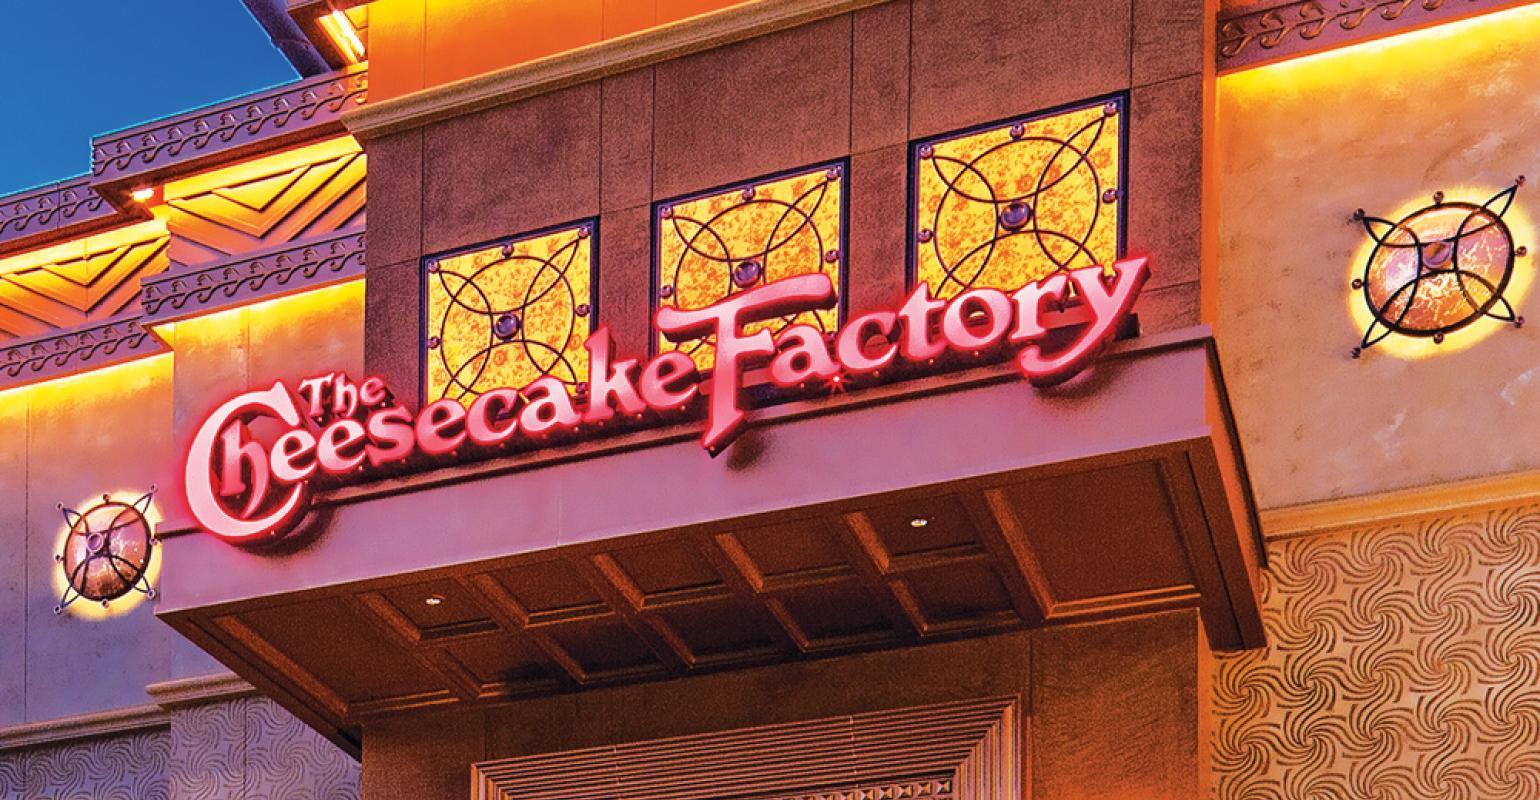 The Cheesecake Factory to open Friday in Reno